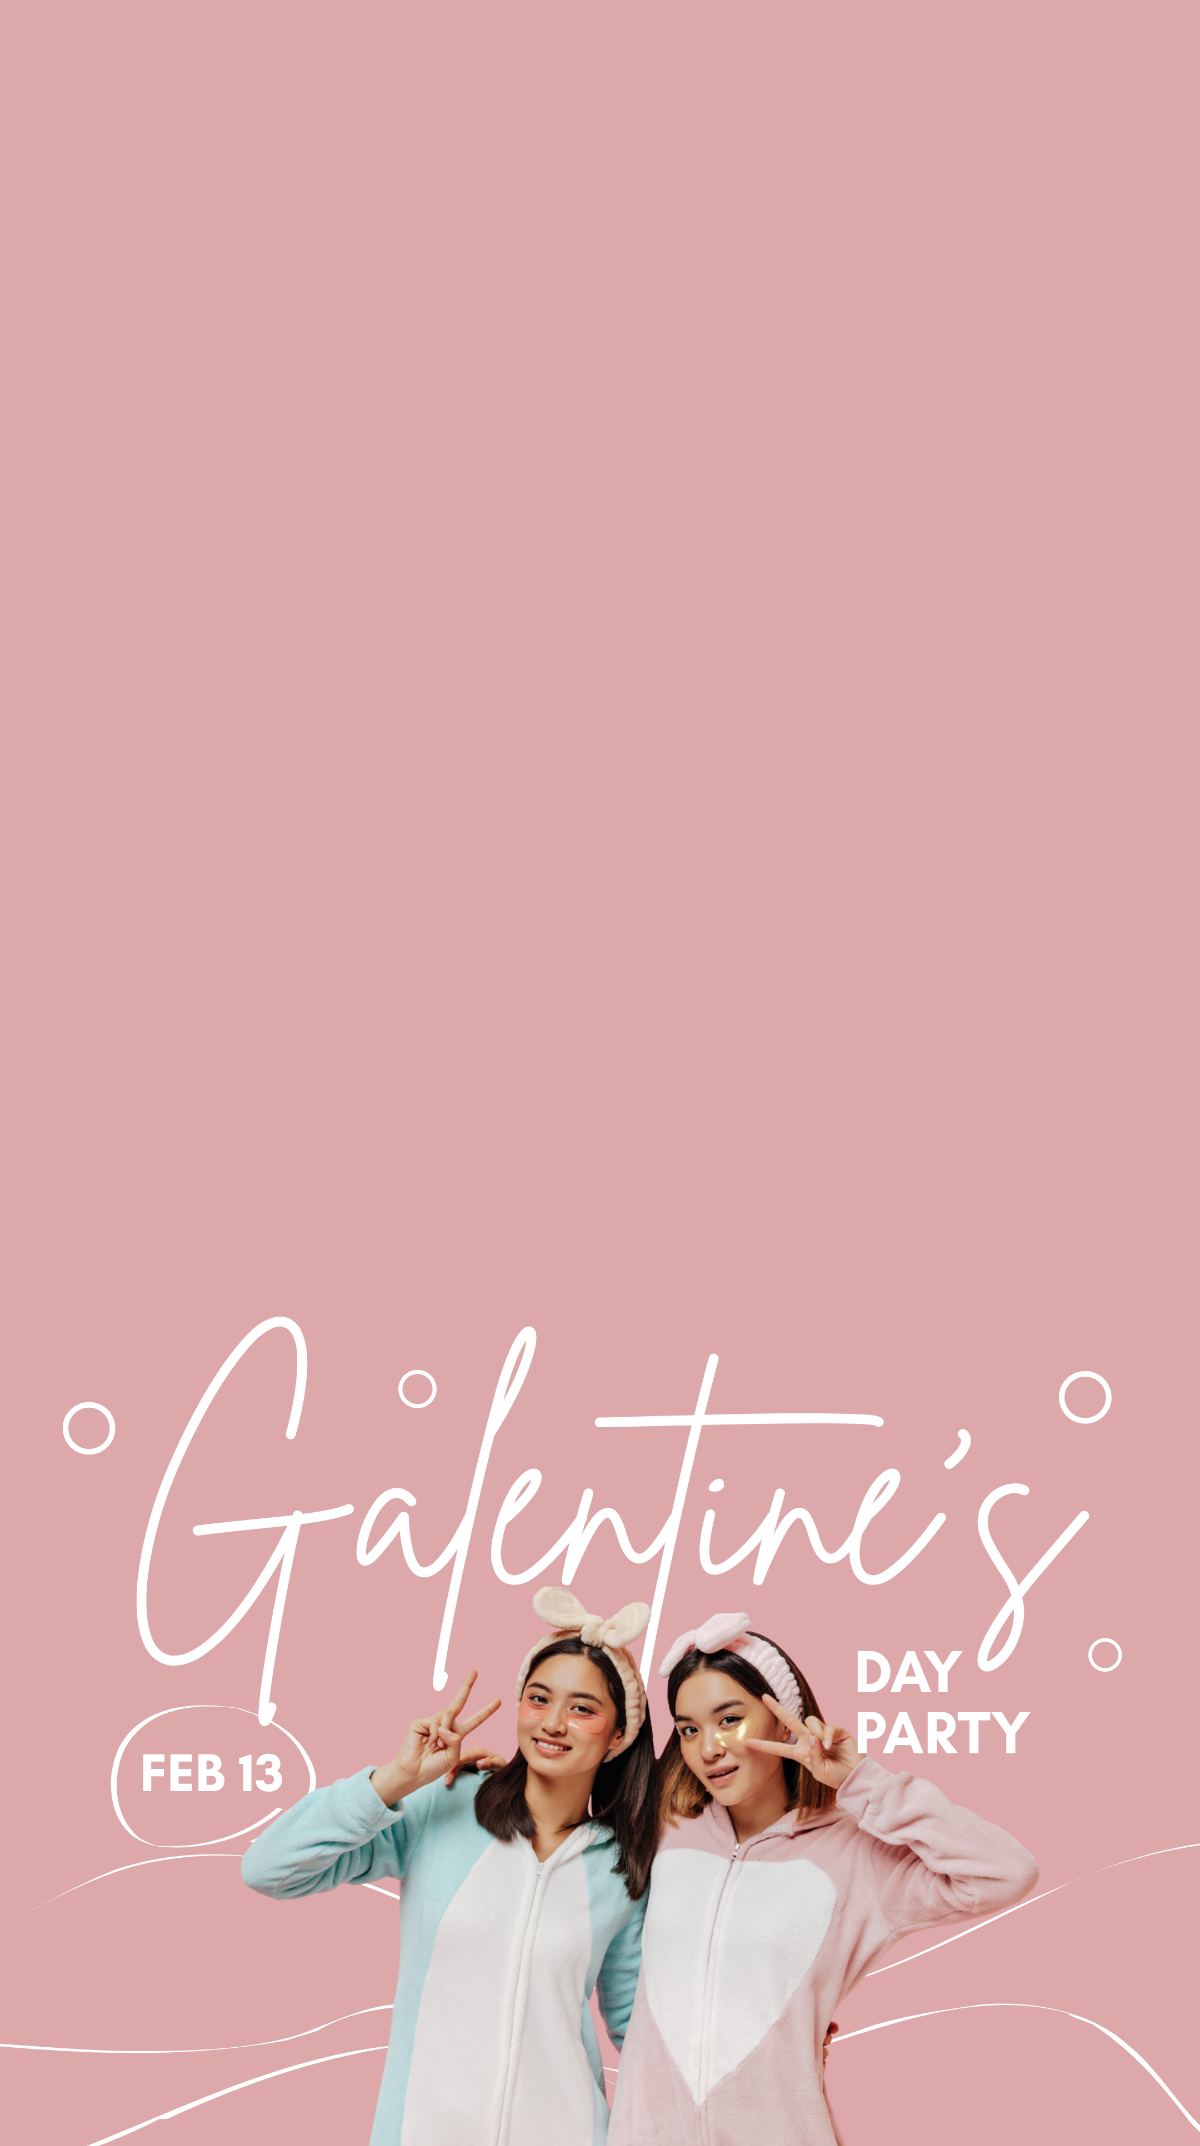 Galentines Day Party Snapchat Geofilter